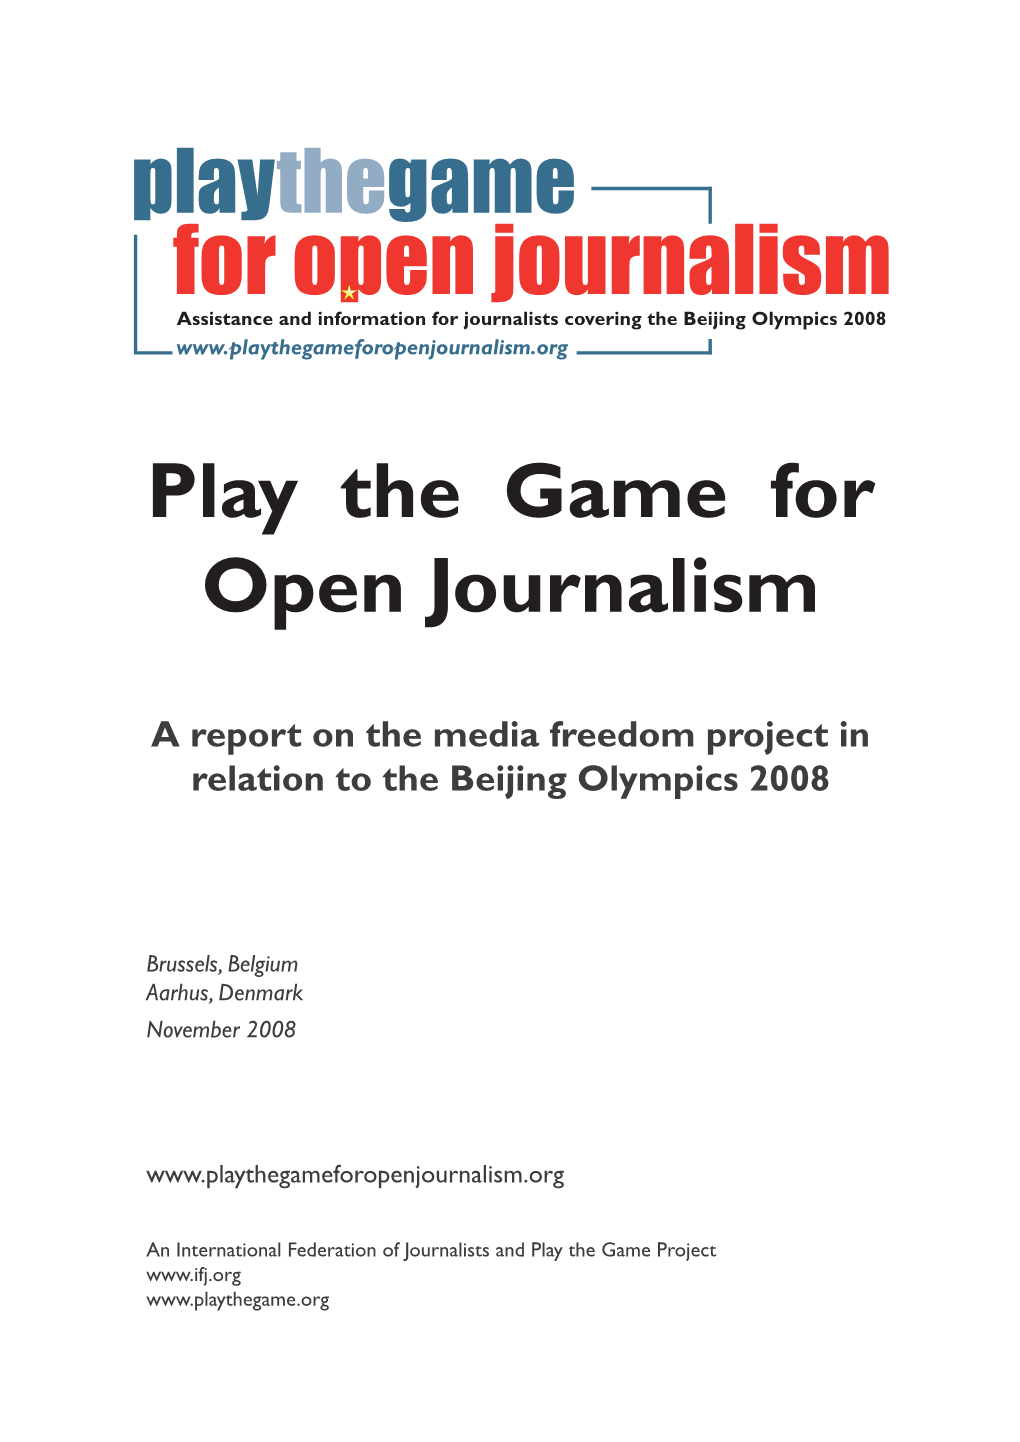 For Open Journalism Assistance and Information for Journalists Covering the Beijing Olympics 2008